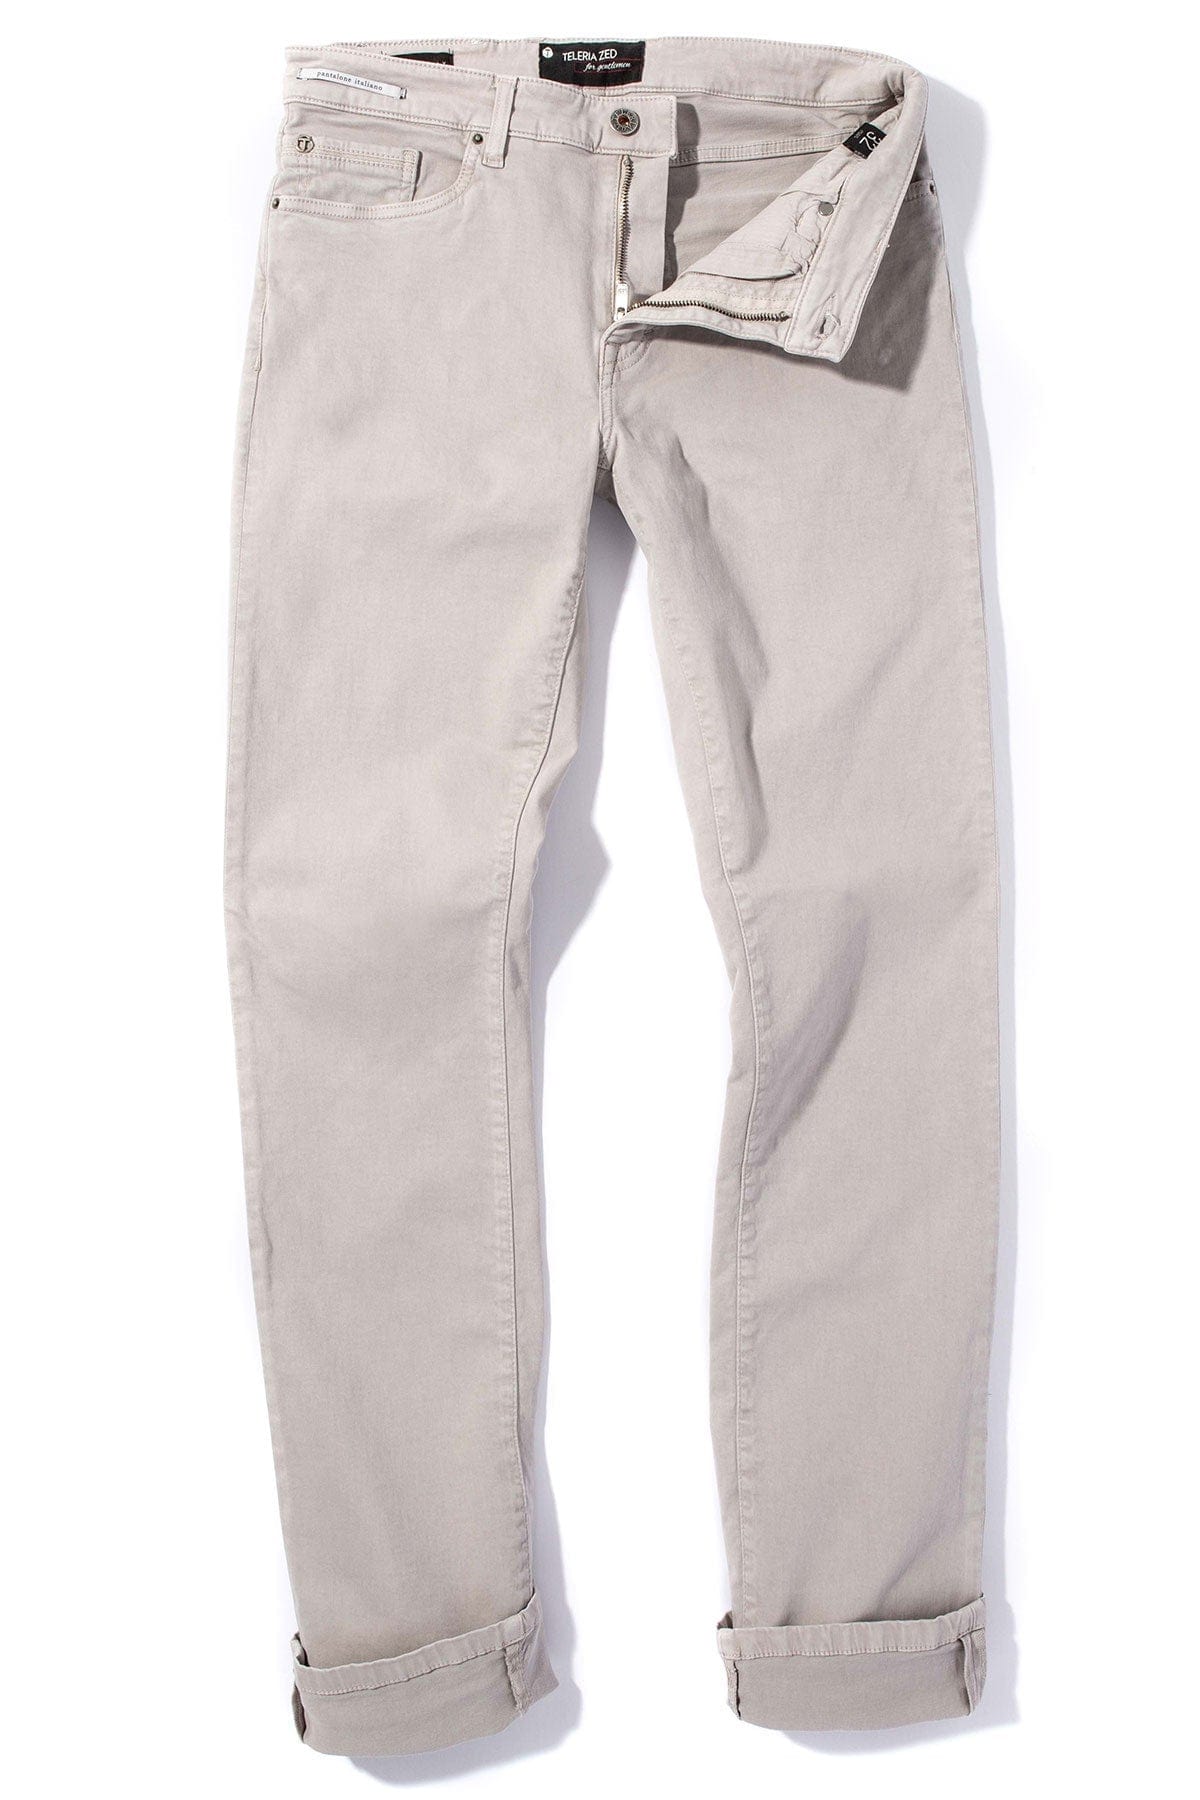 Ryland Rugged Soft Touch Cotton Jeans in Sasso - AXEL'S